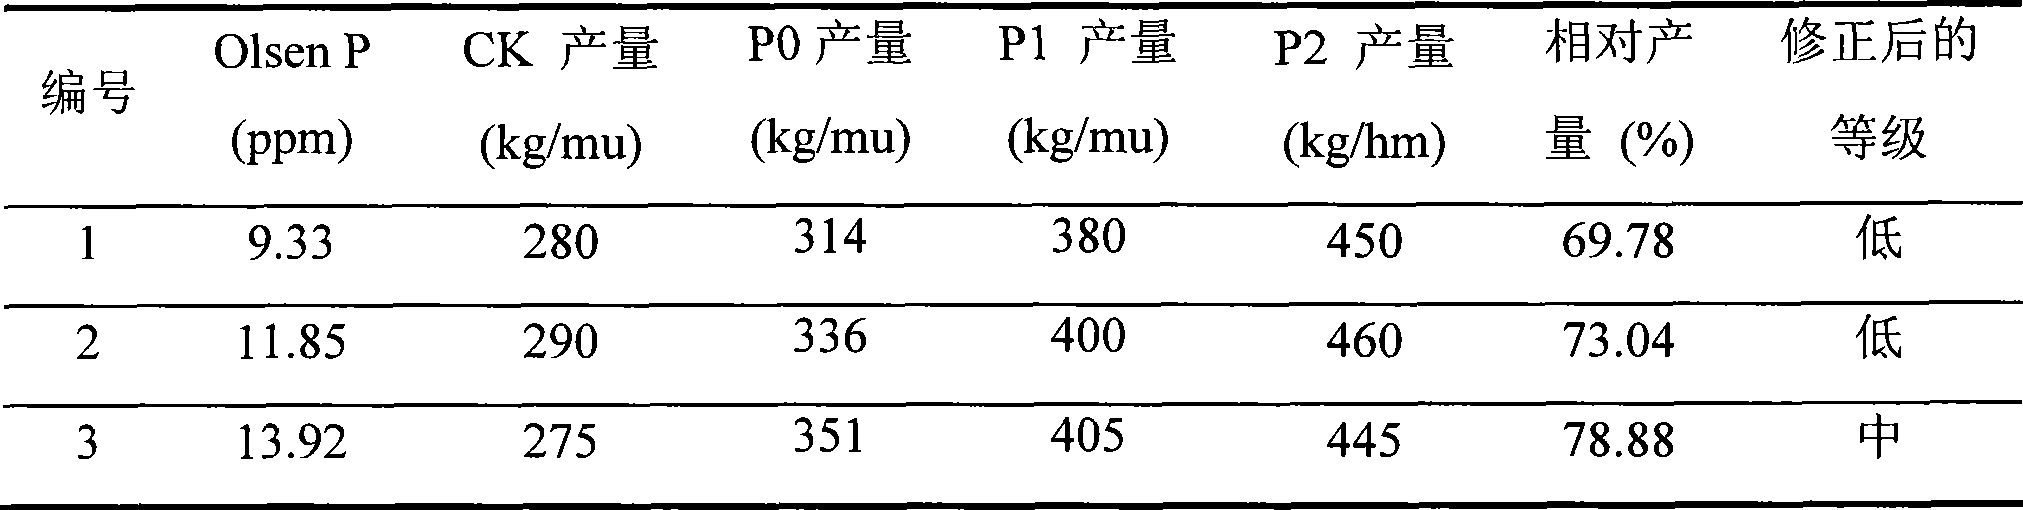 Method for correcting graded index of soil nutrient